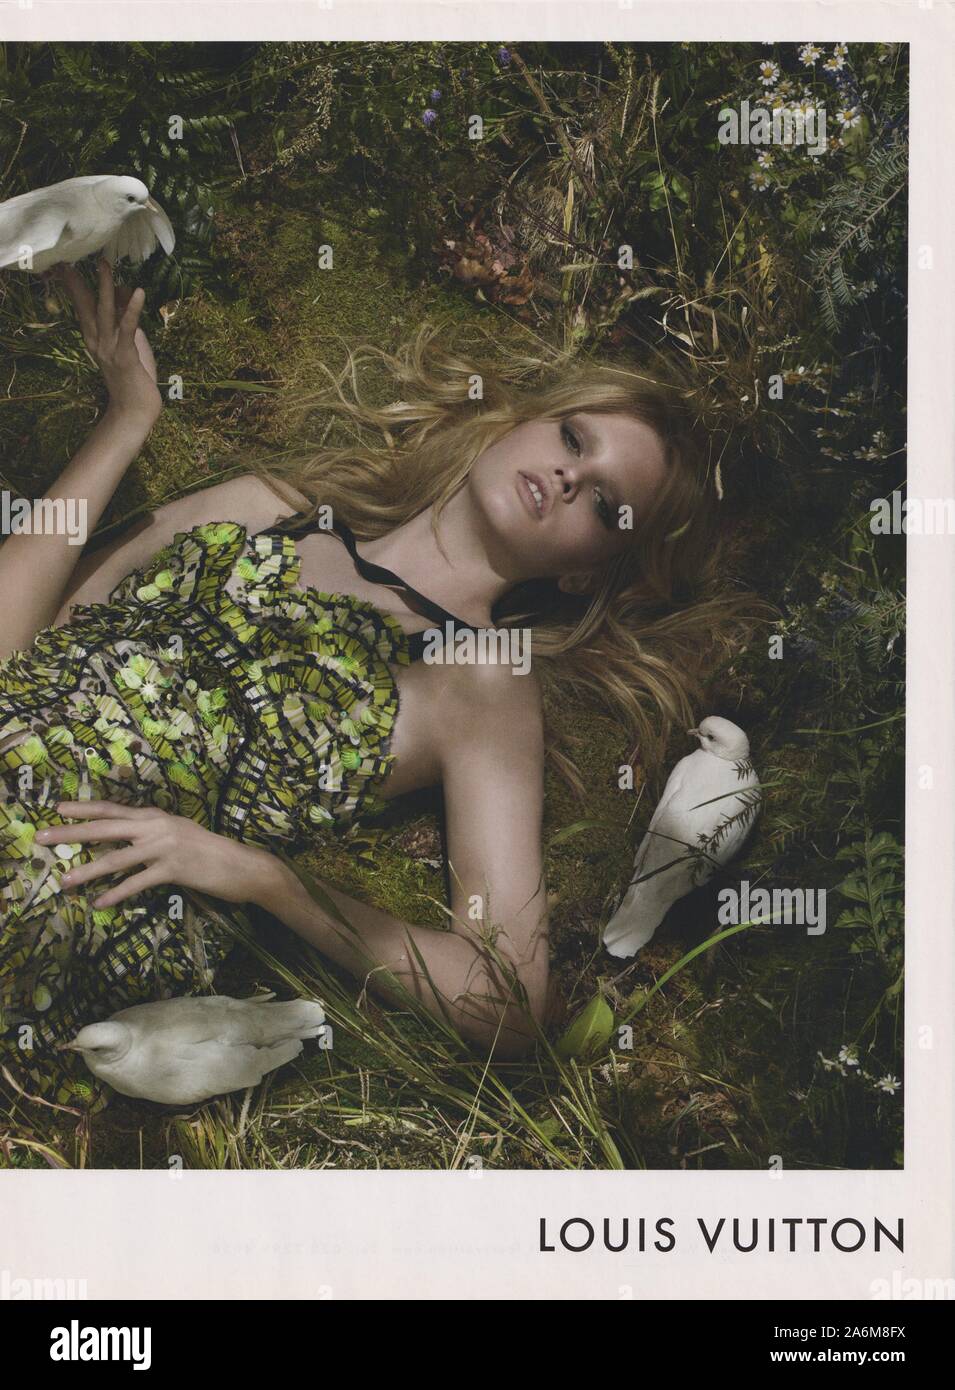 poster advertising Louis Vuitton handbag with Lara Stone in paper magazine  from 2010 year, advertisement, creative LV Louis Vuitton advert from 2010s  Stock Photo - Alamy